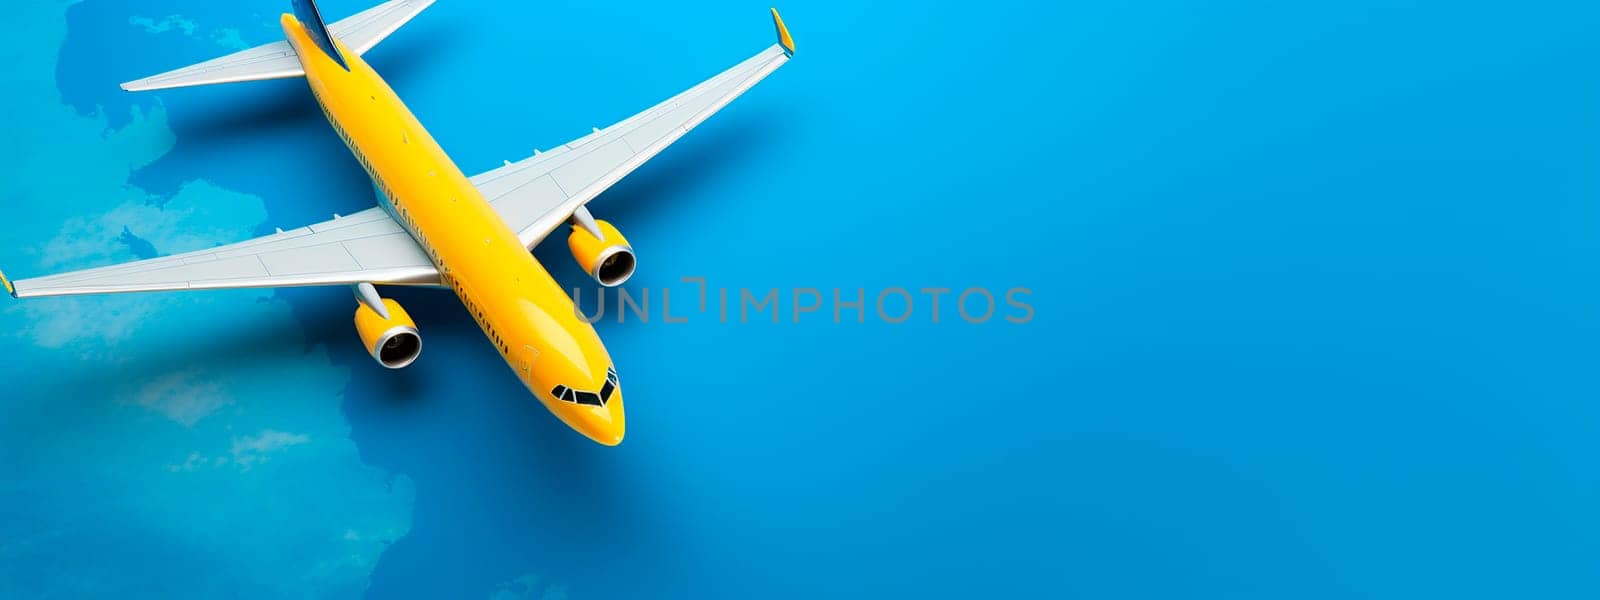 An airplane on a blue and yellow map background. Selective focus. Ukraine.